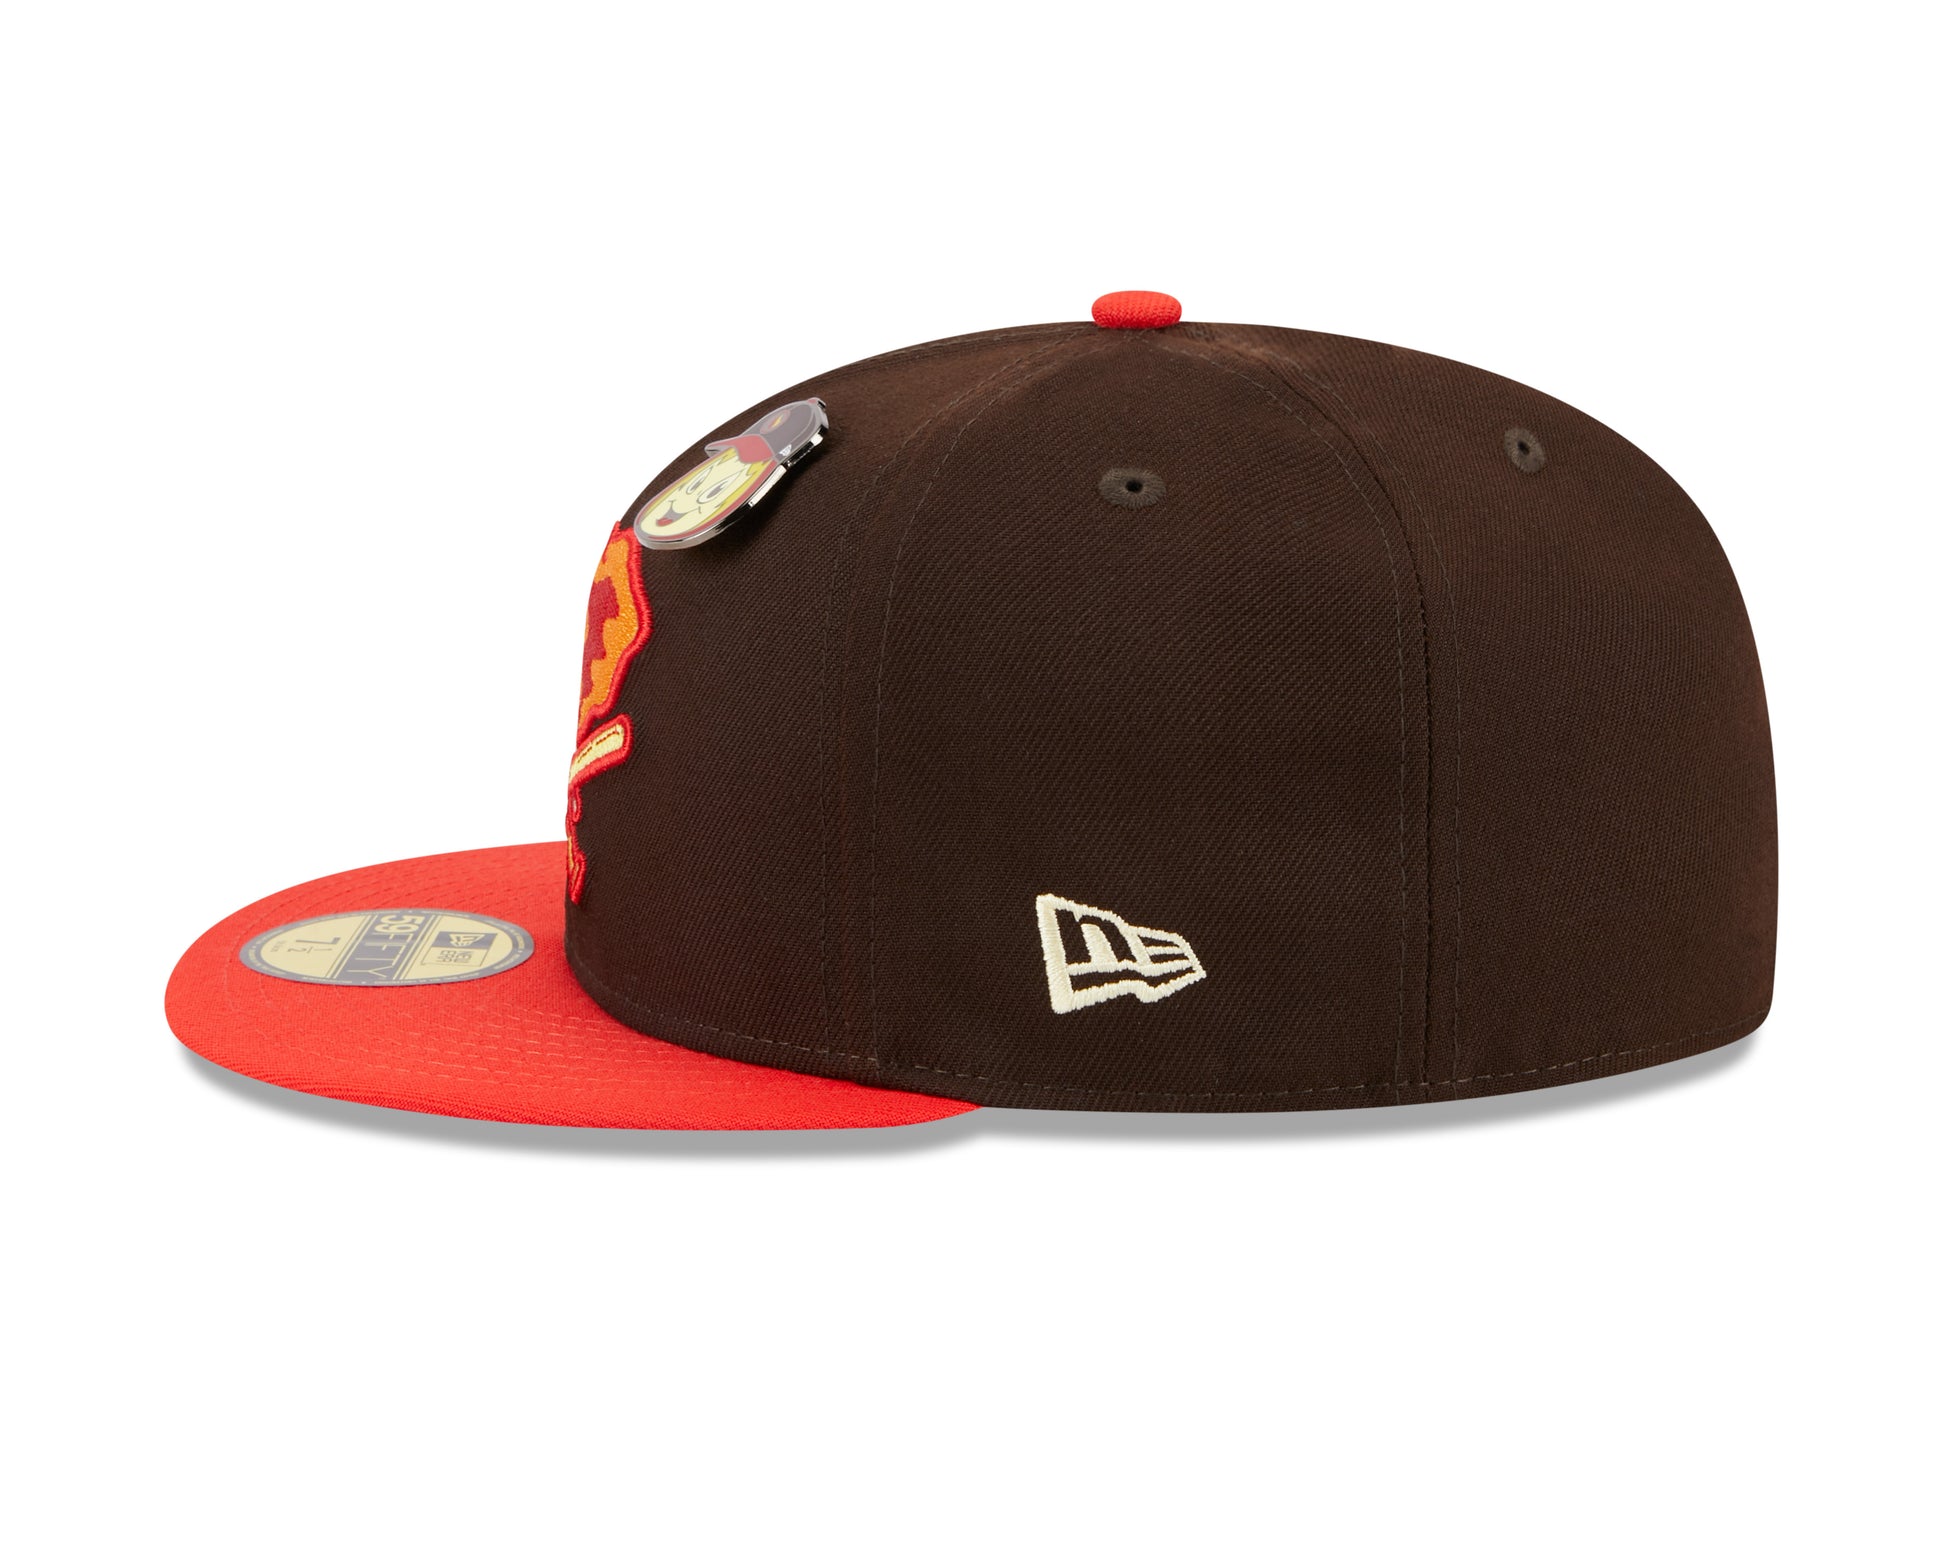 New Era 59fifty Fitted Cap Oakland Athletics Cooperstown THE ELEMENTS - Brown - Headz Up 